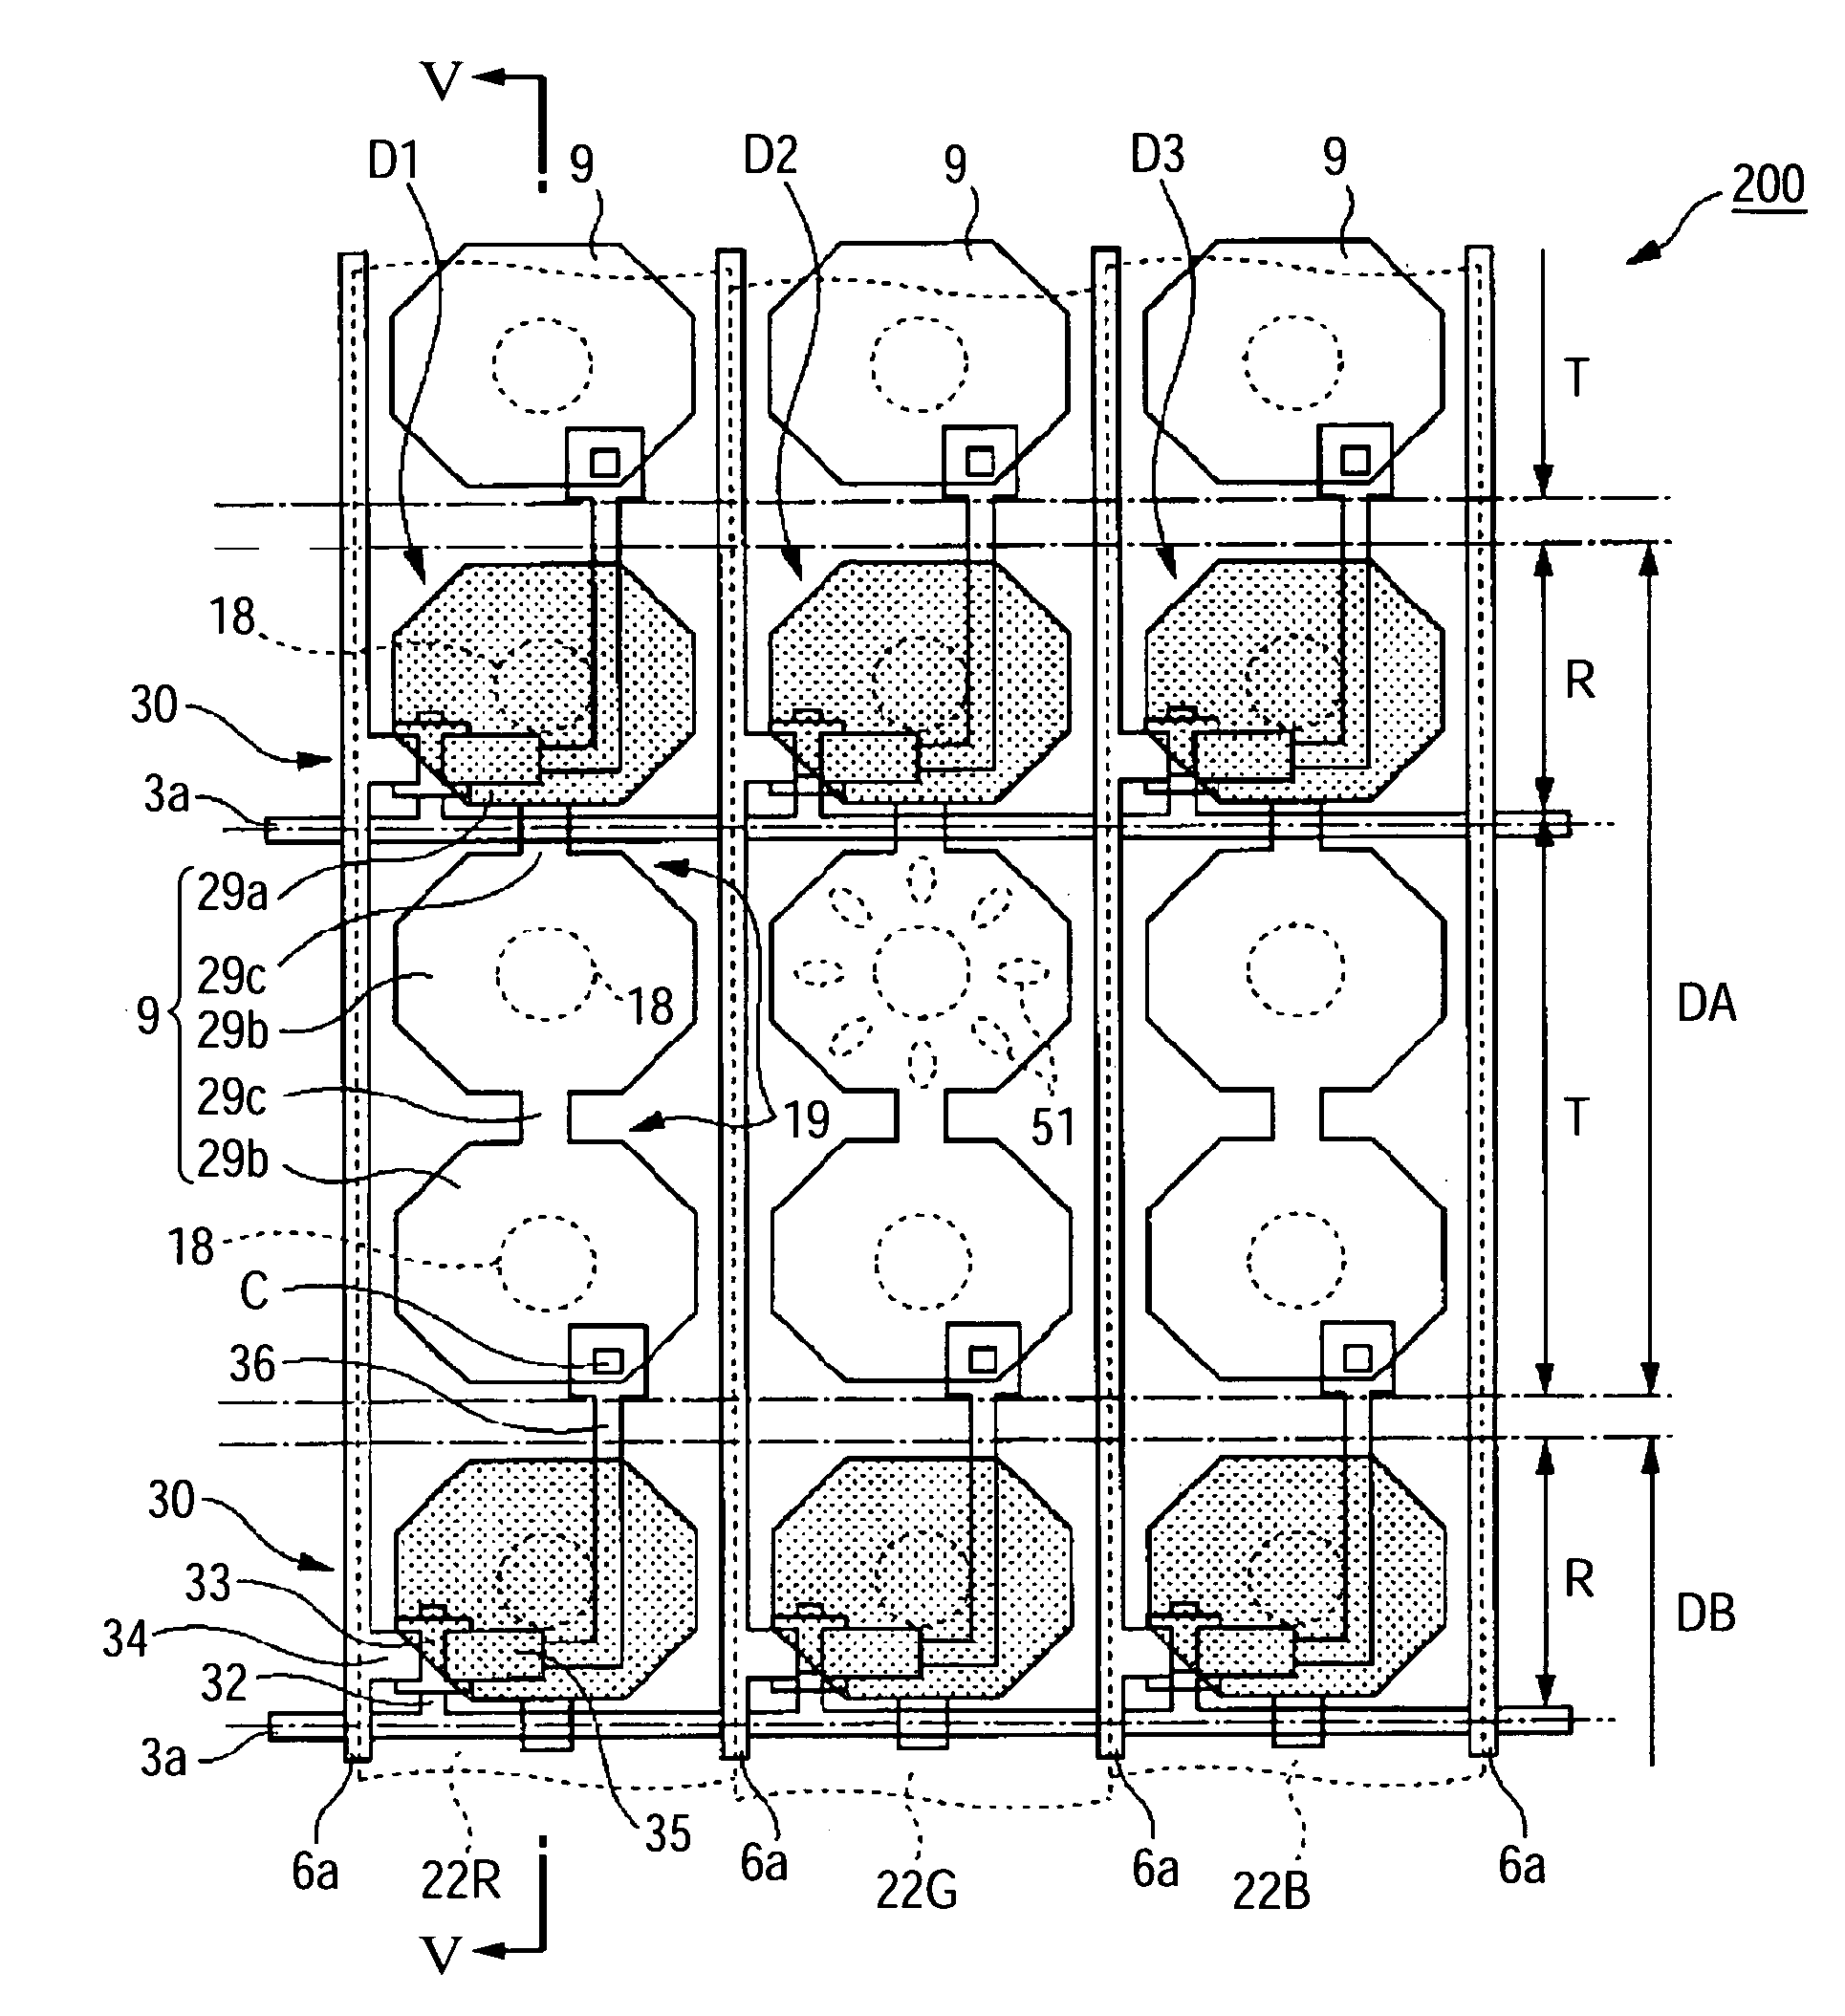 Liquid crystal display device with plurality of interconnected island shaped pixel portions forming pixel electrodes where scanning line overlaps an interconnected portion